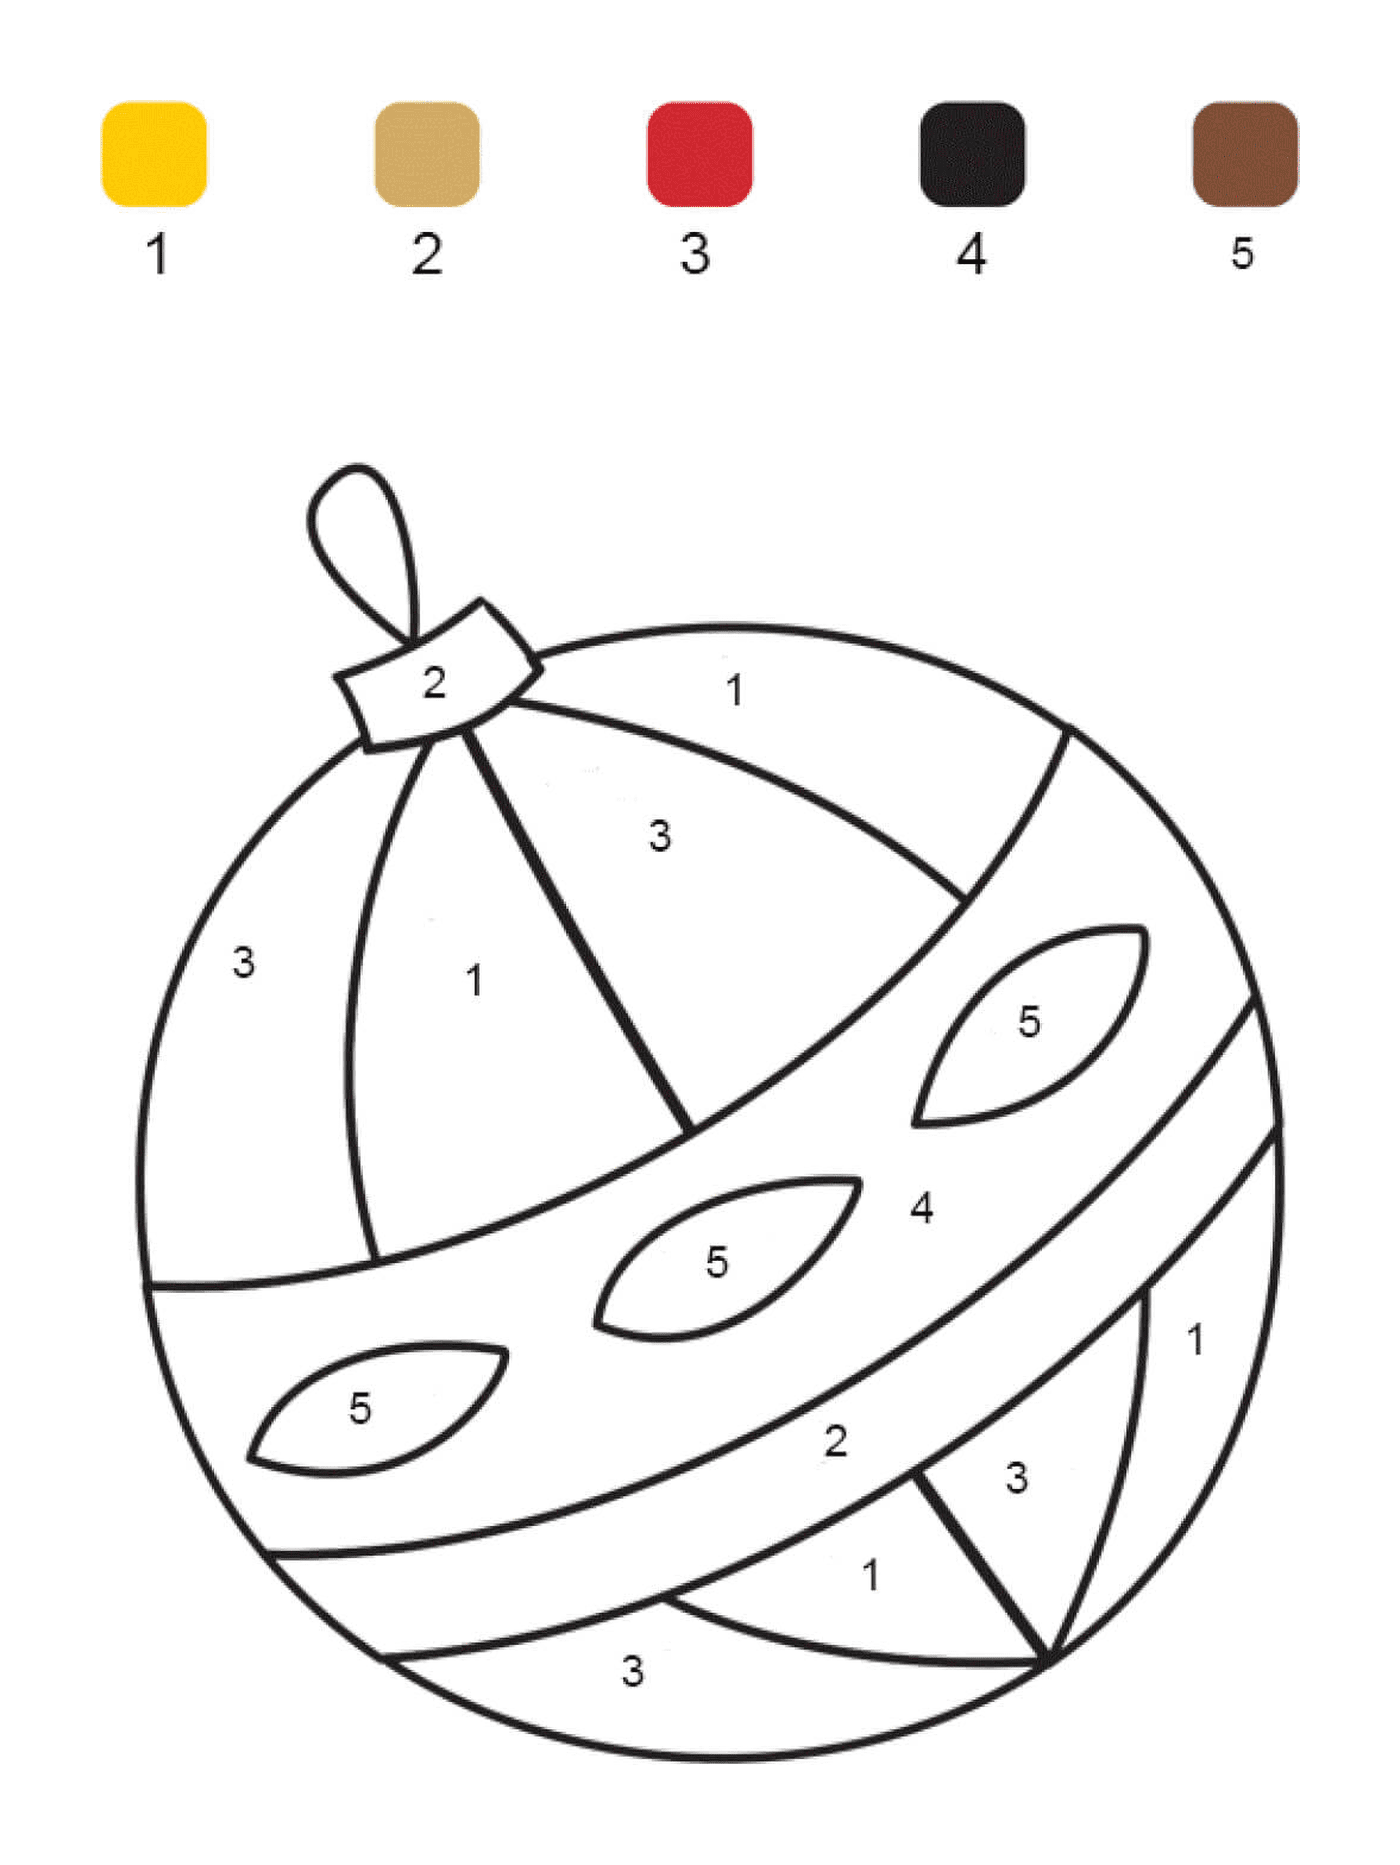  Numbered colored Christmas ball 